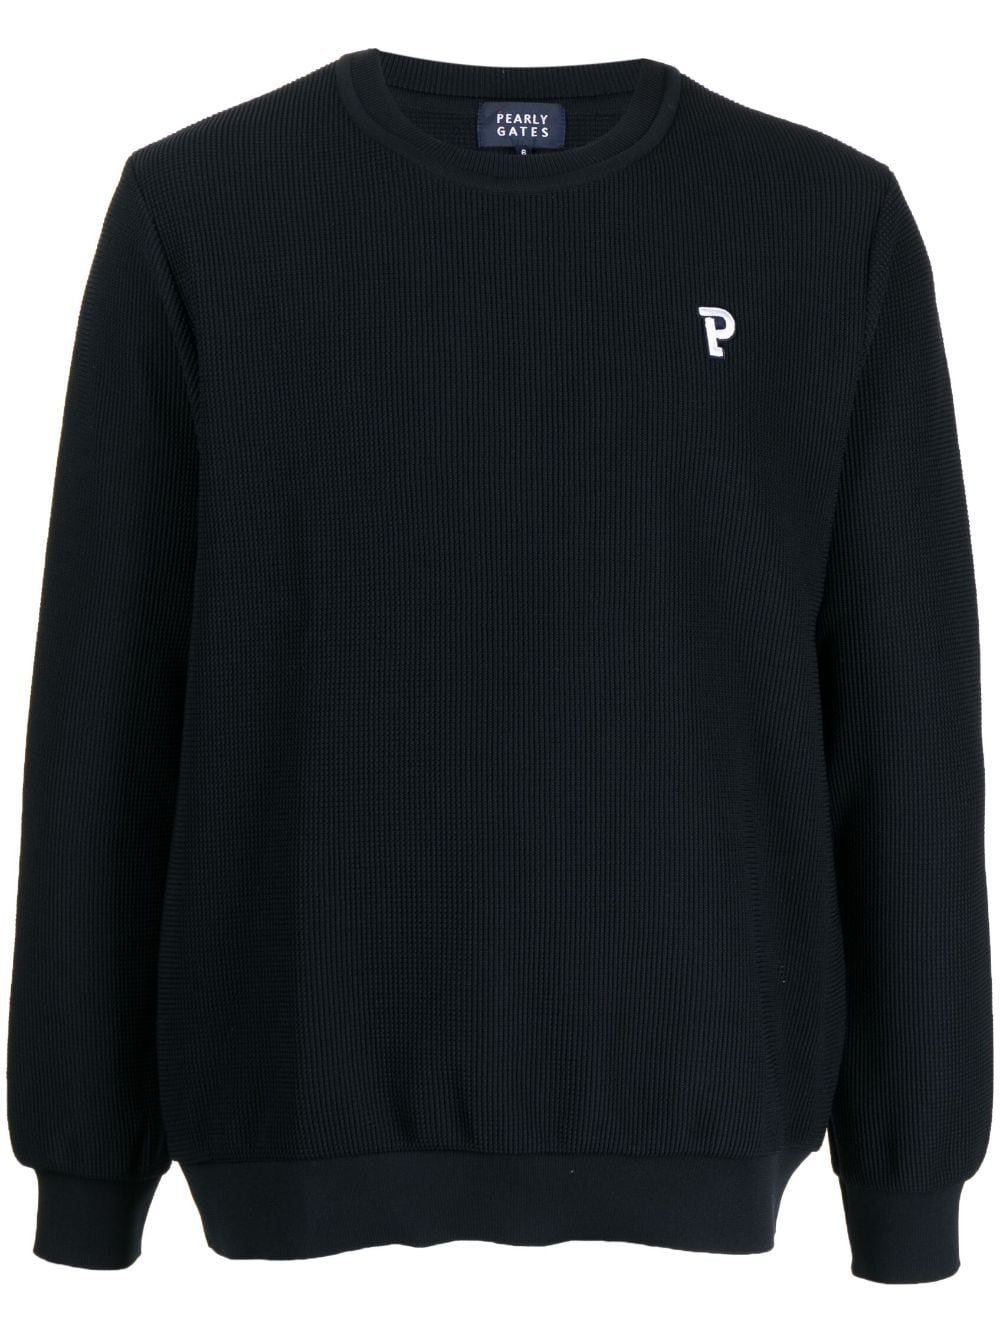 Pearly Gates Logo-patch Crew Neck Jumper In Black